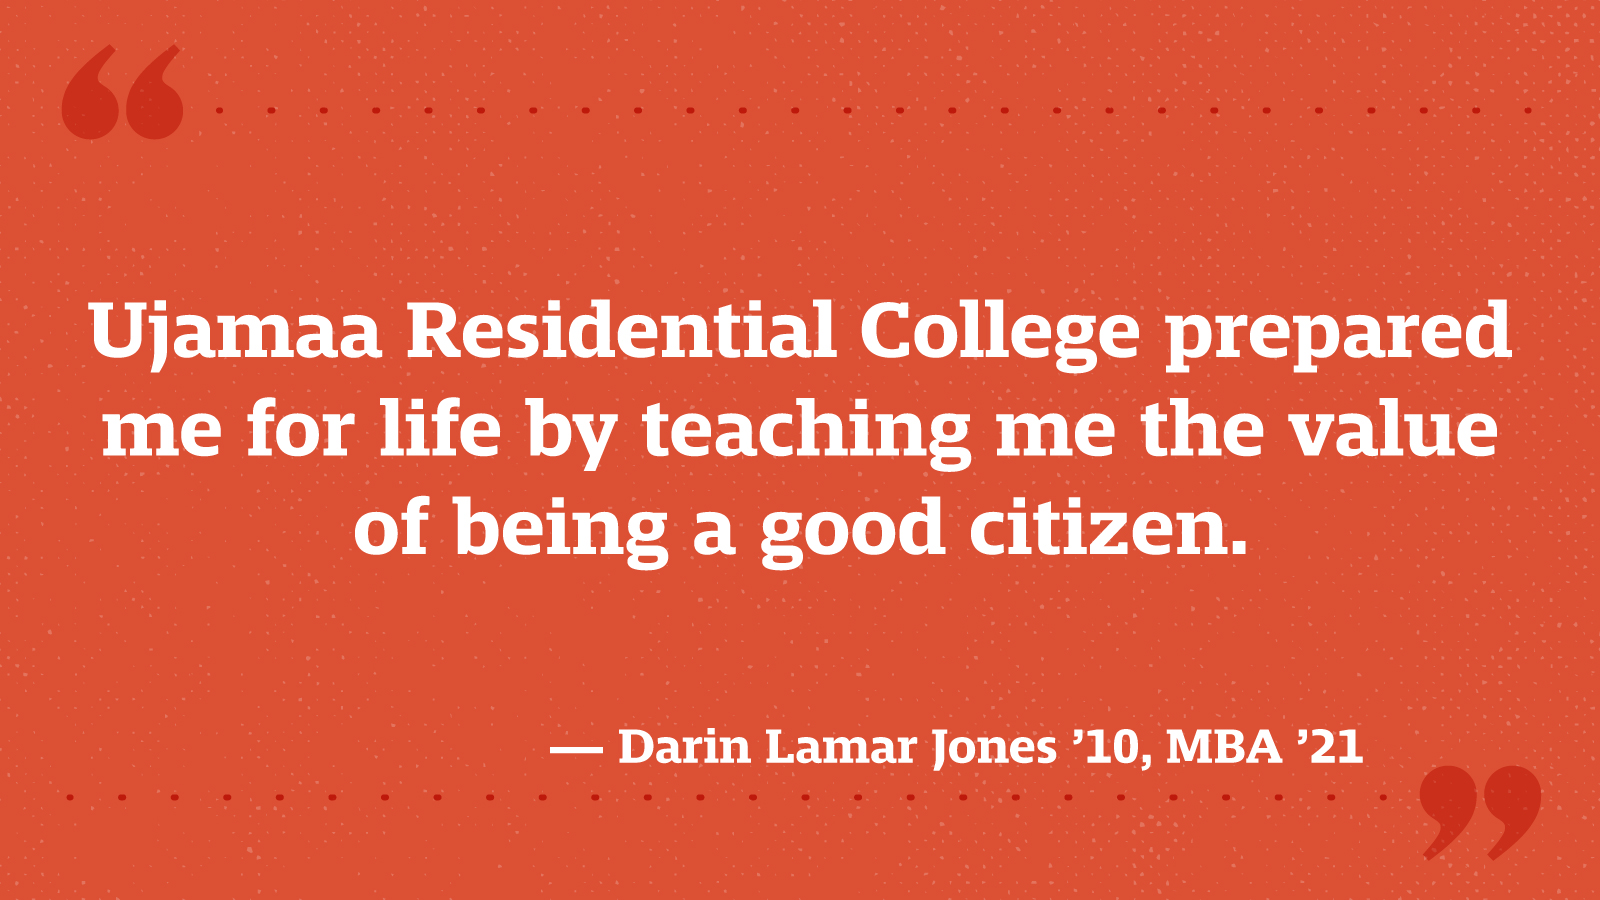 Ujamaa Residential College prepared me for life by teaching me the value of being a good citizen. — Darin Lamar Jones ’10, MBA ’21